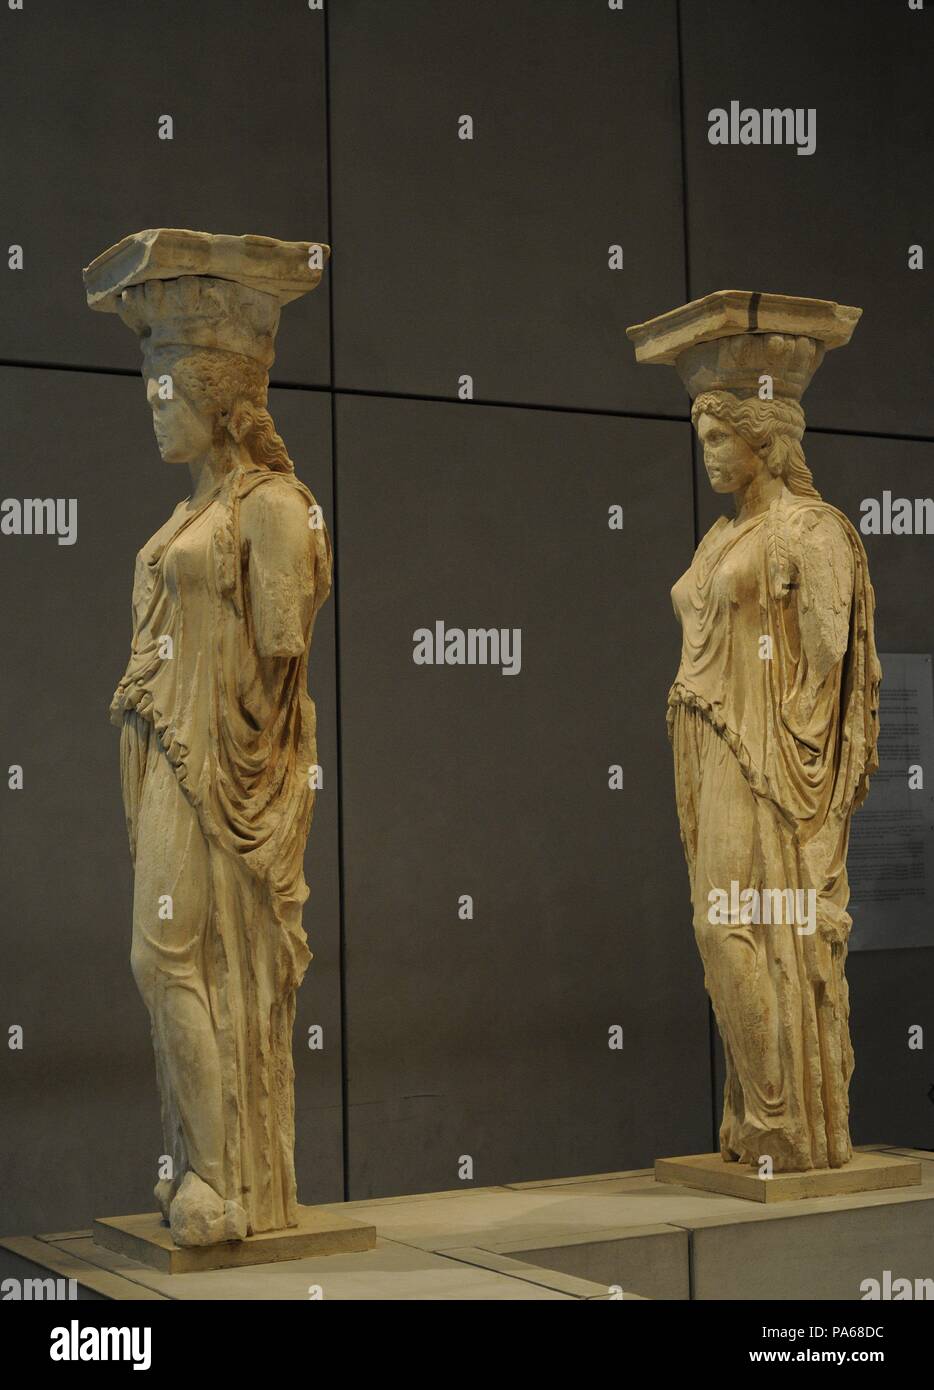 Greek art. The Caryatid Porch of the Erechtheion. Draped female figures as supporting columns. Acropolis of Athens, 421-407 BC. Greece. Acropolis Museum. Athens. Greece. Stock Photo